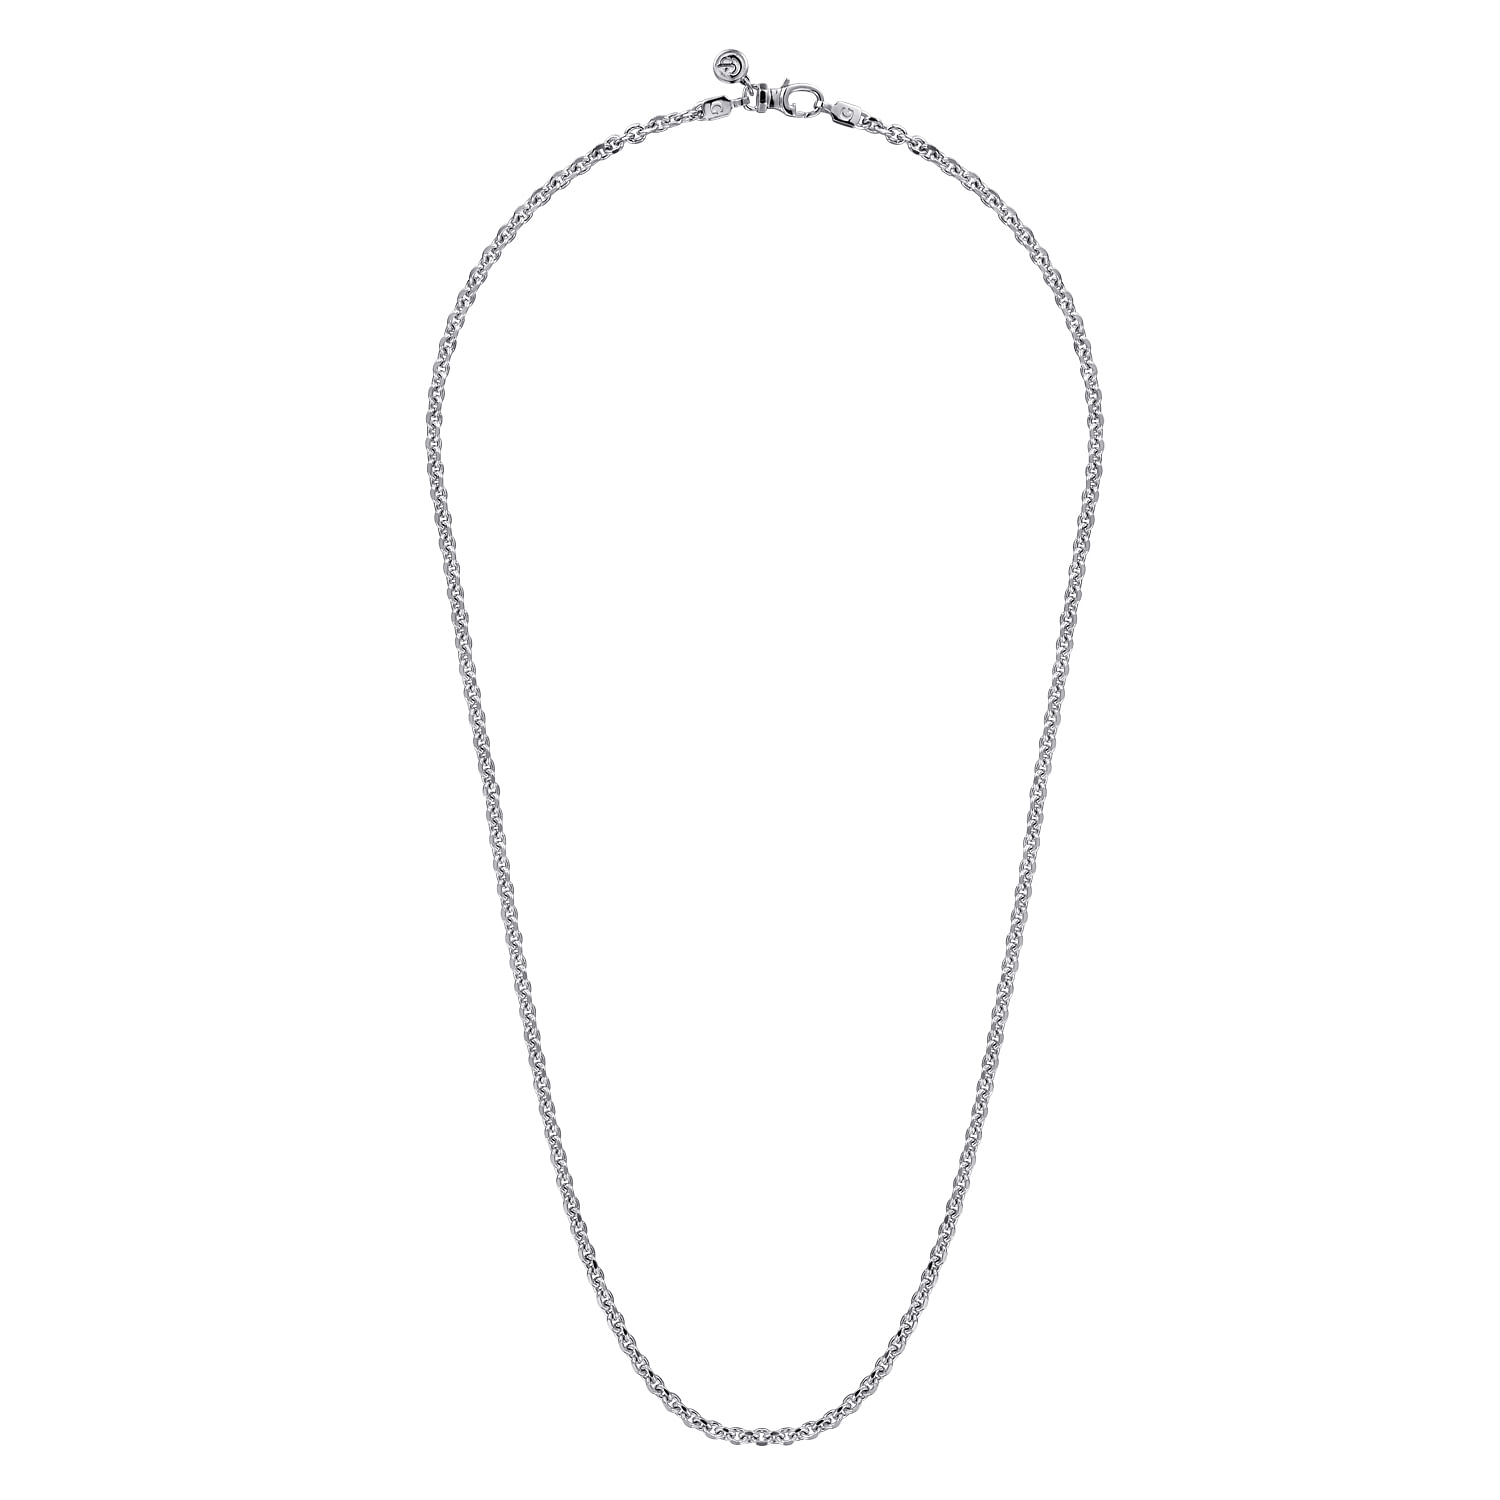 24 Inch 925 Sterling Silver Men's Link Chain Necklace 